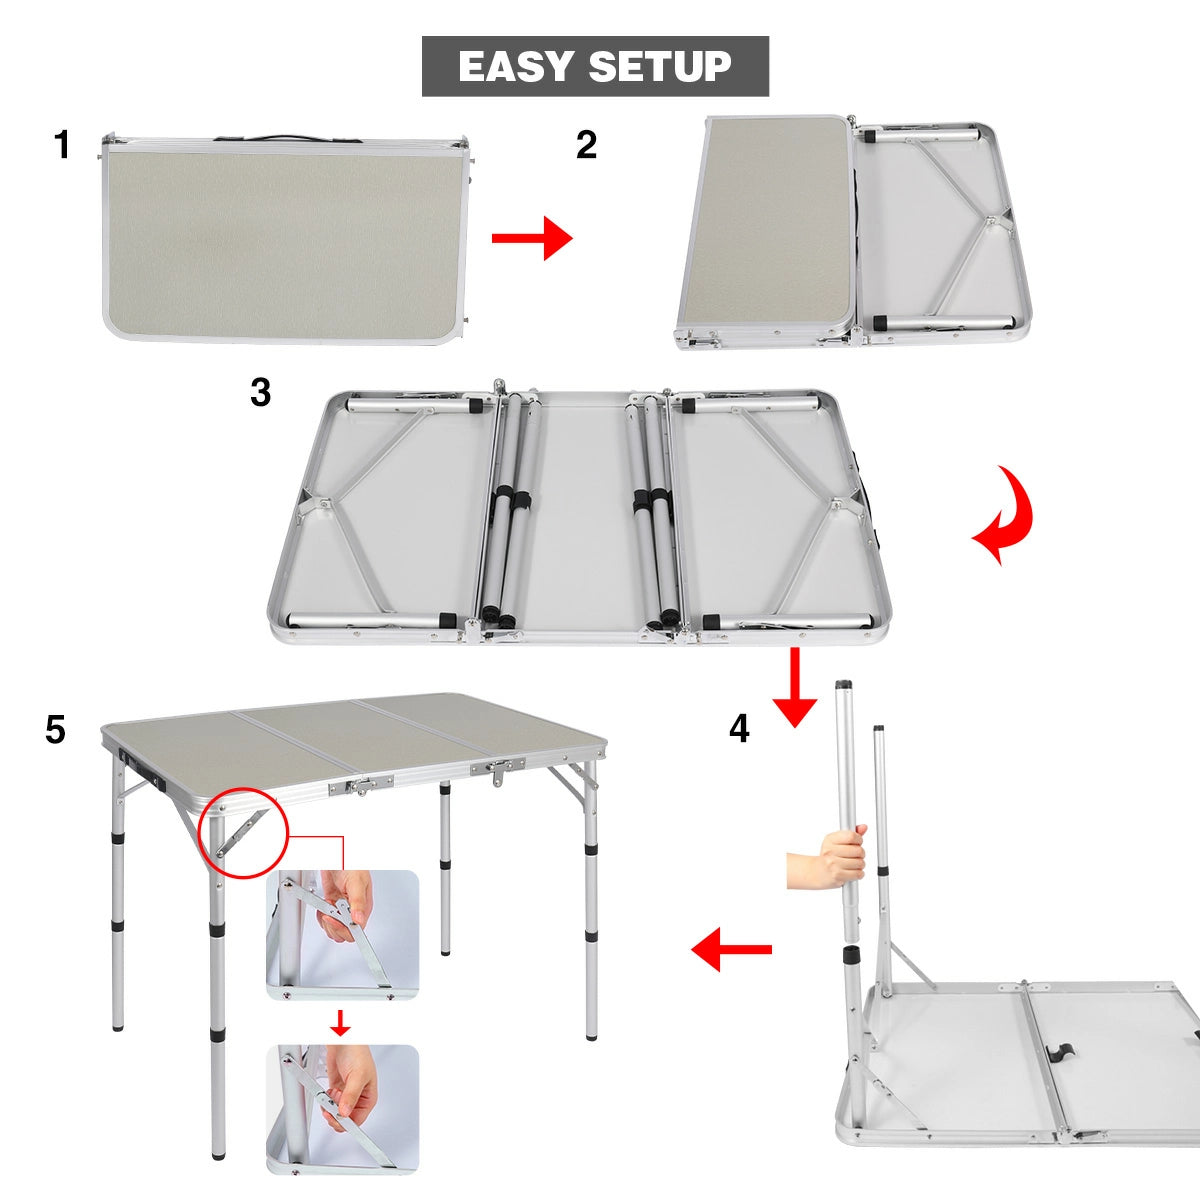 Portable Tri-fold Camping Table with Adjustable Heights